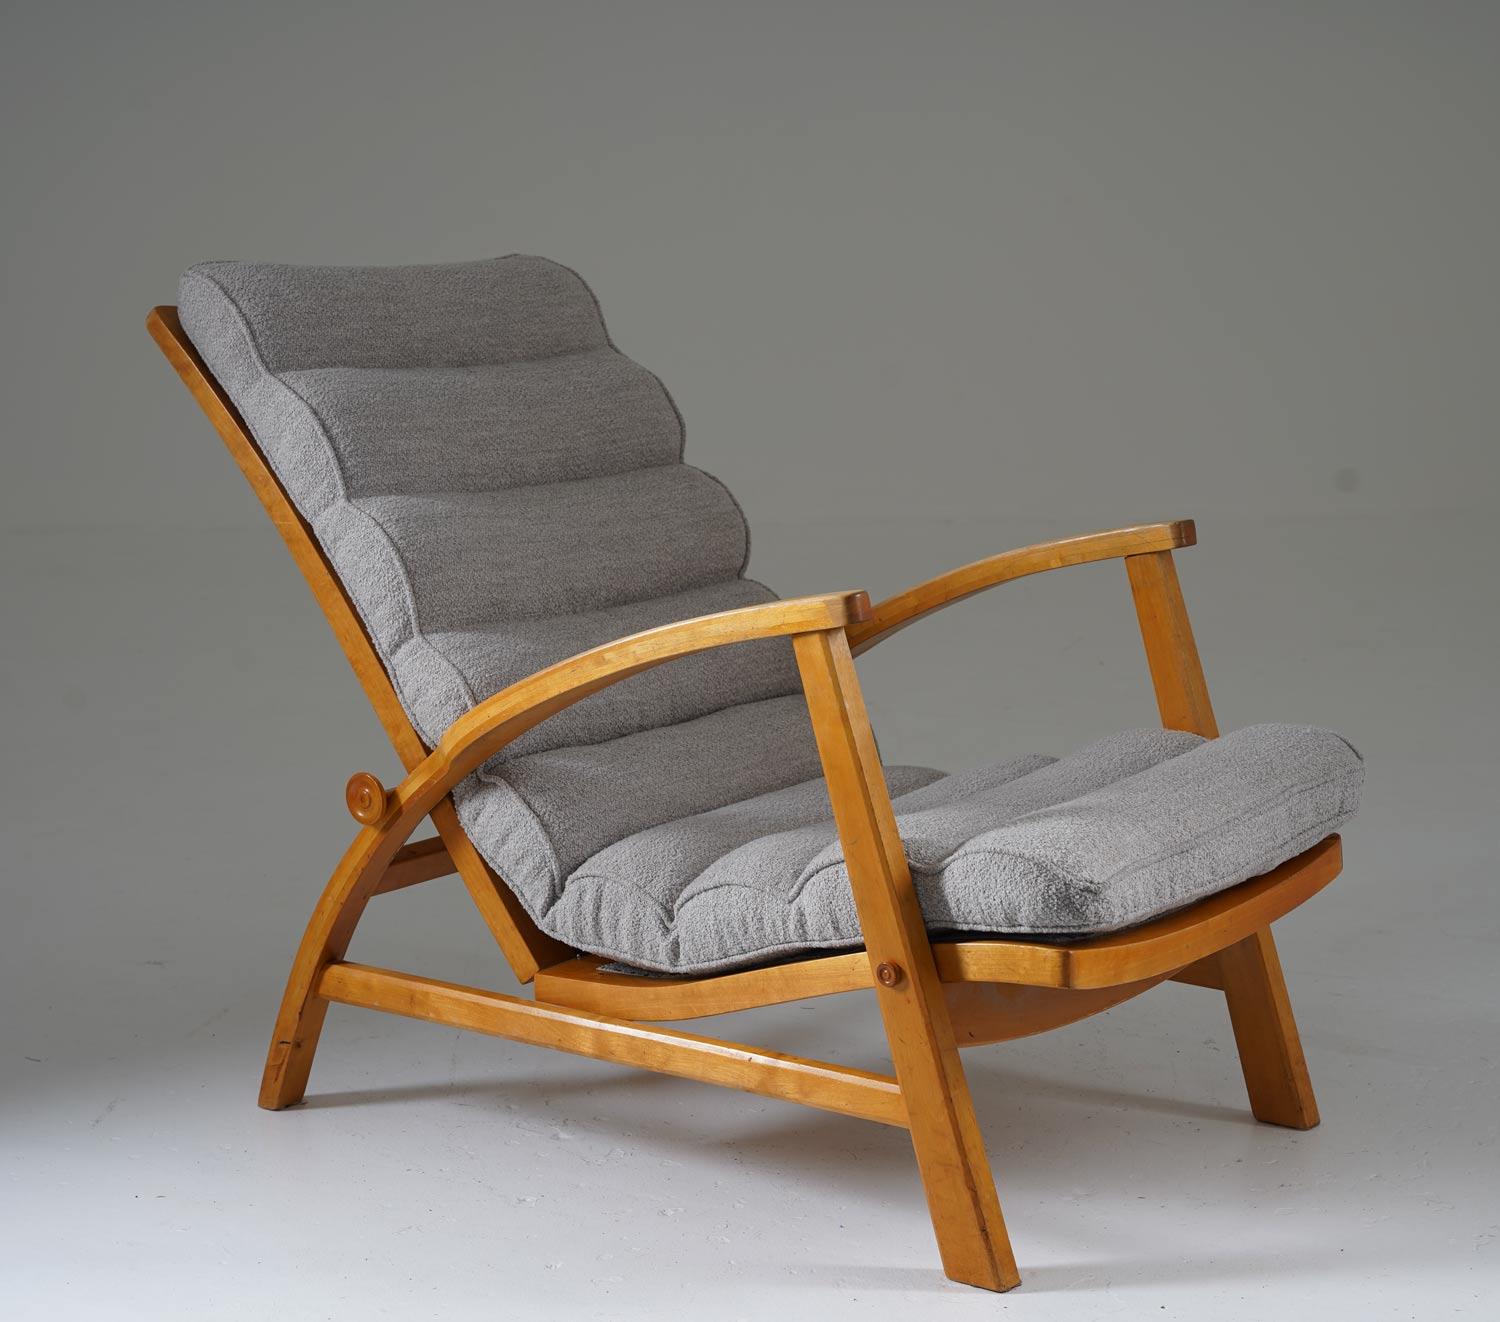 Early modernist lounge chair, model 